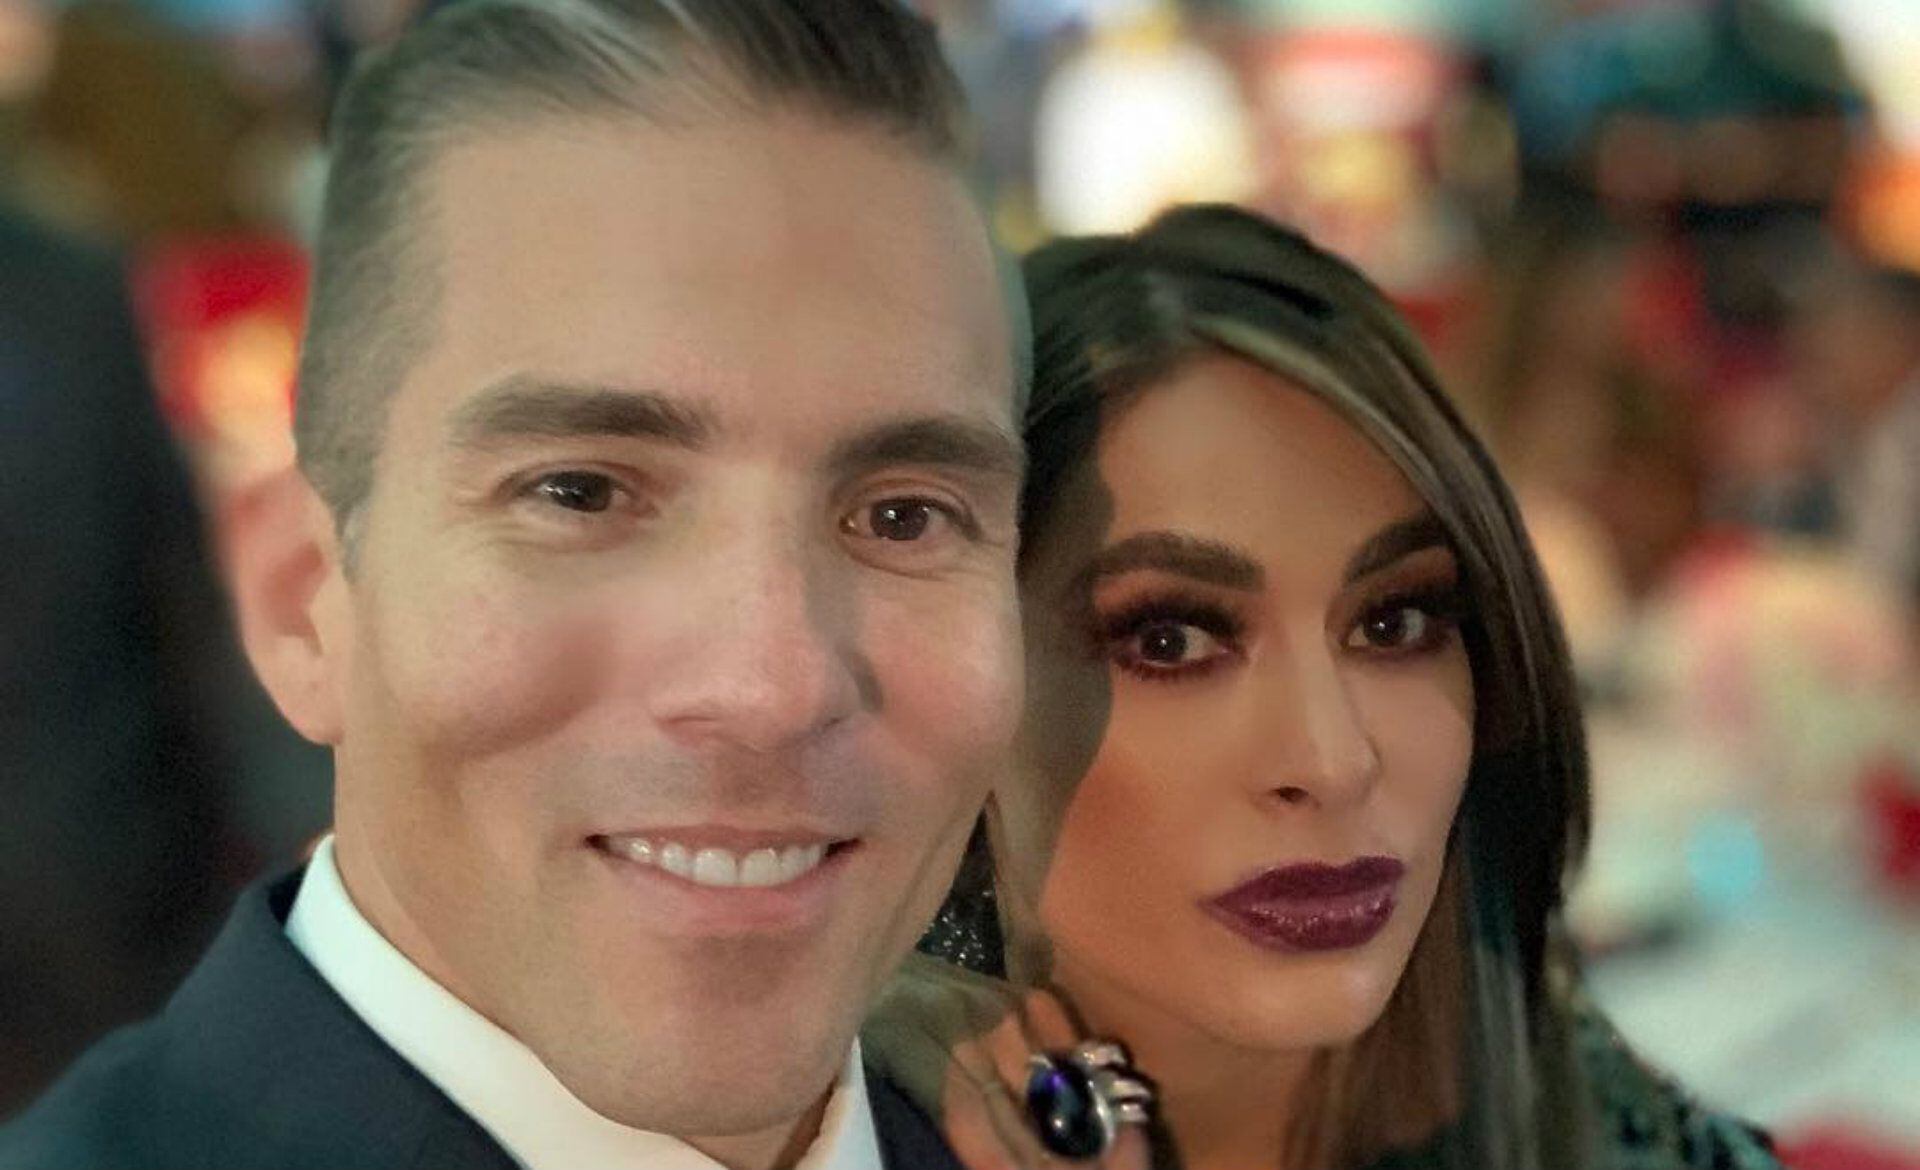 “It’s an attack on women”: Galilea Montijo’s husband spoke about the accusations against the driver